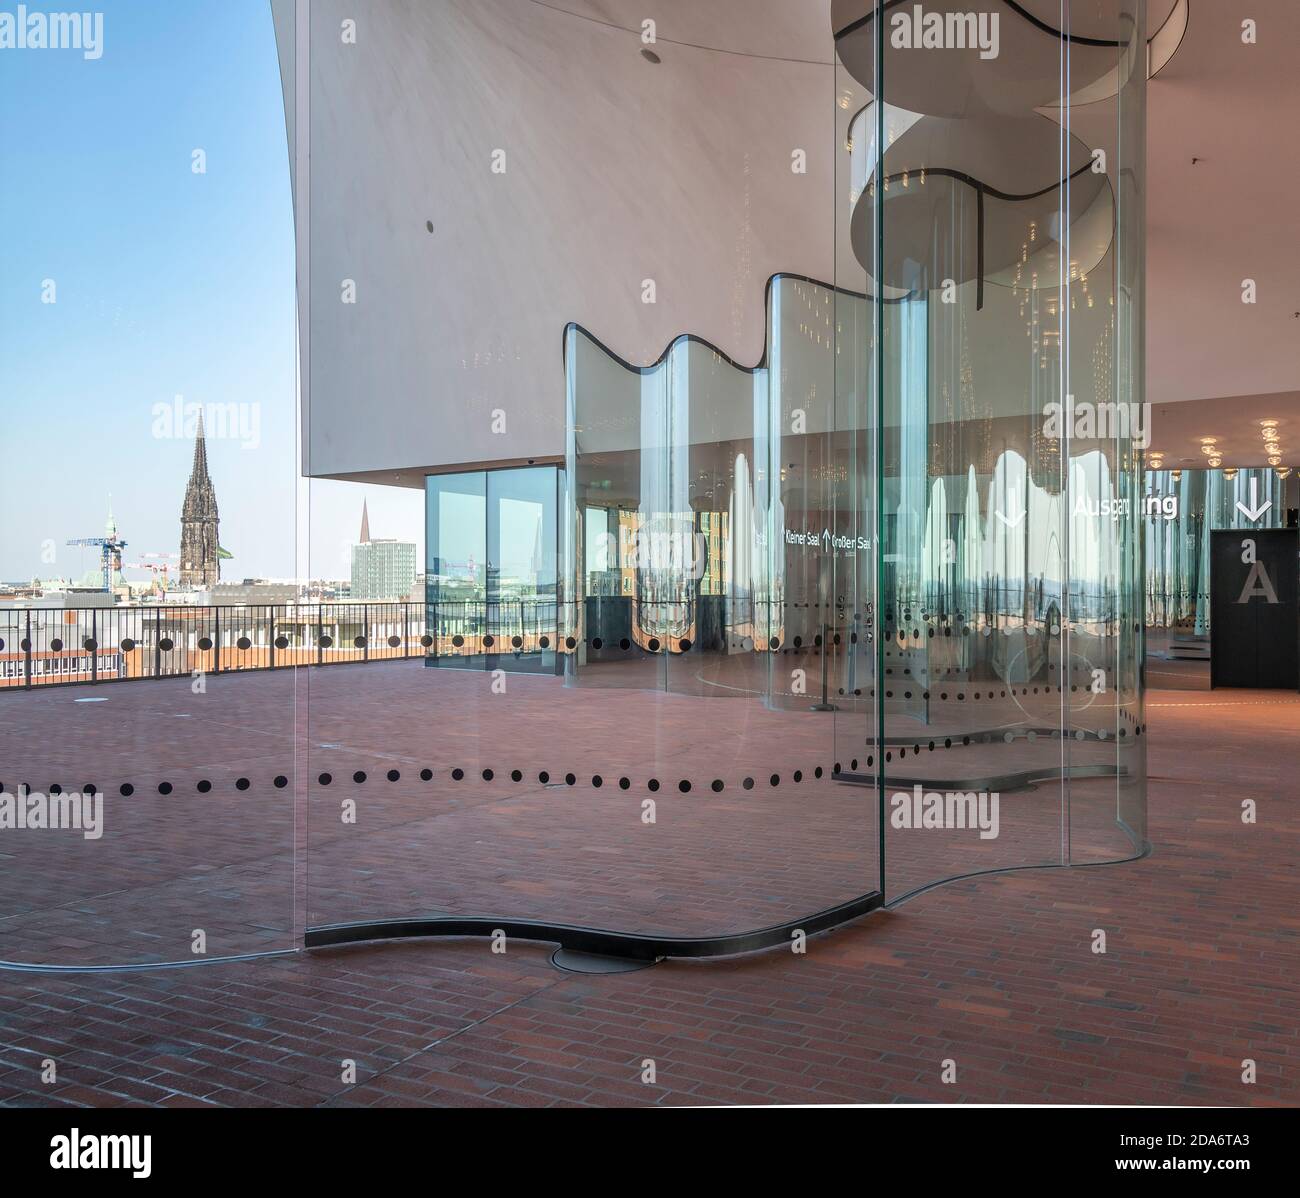 Inside the Elbphilharmonie concert hall in the HafenCity quarter of Hamburg, Germany, on a peninsula of the Elbe River. Popularly nicknamed Elphi. Stock Photo